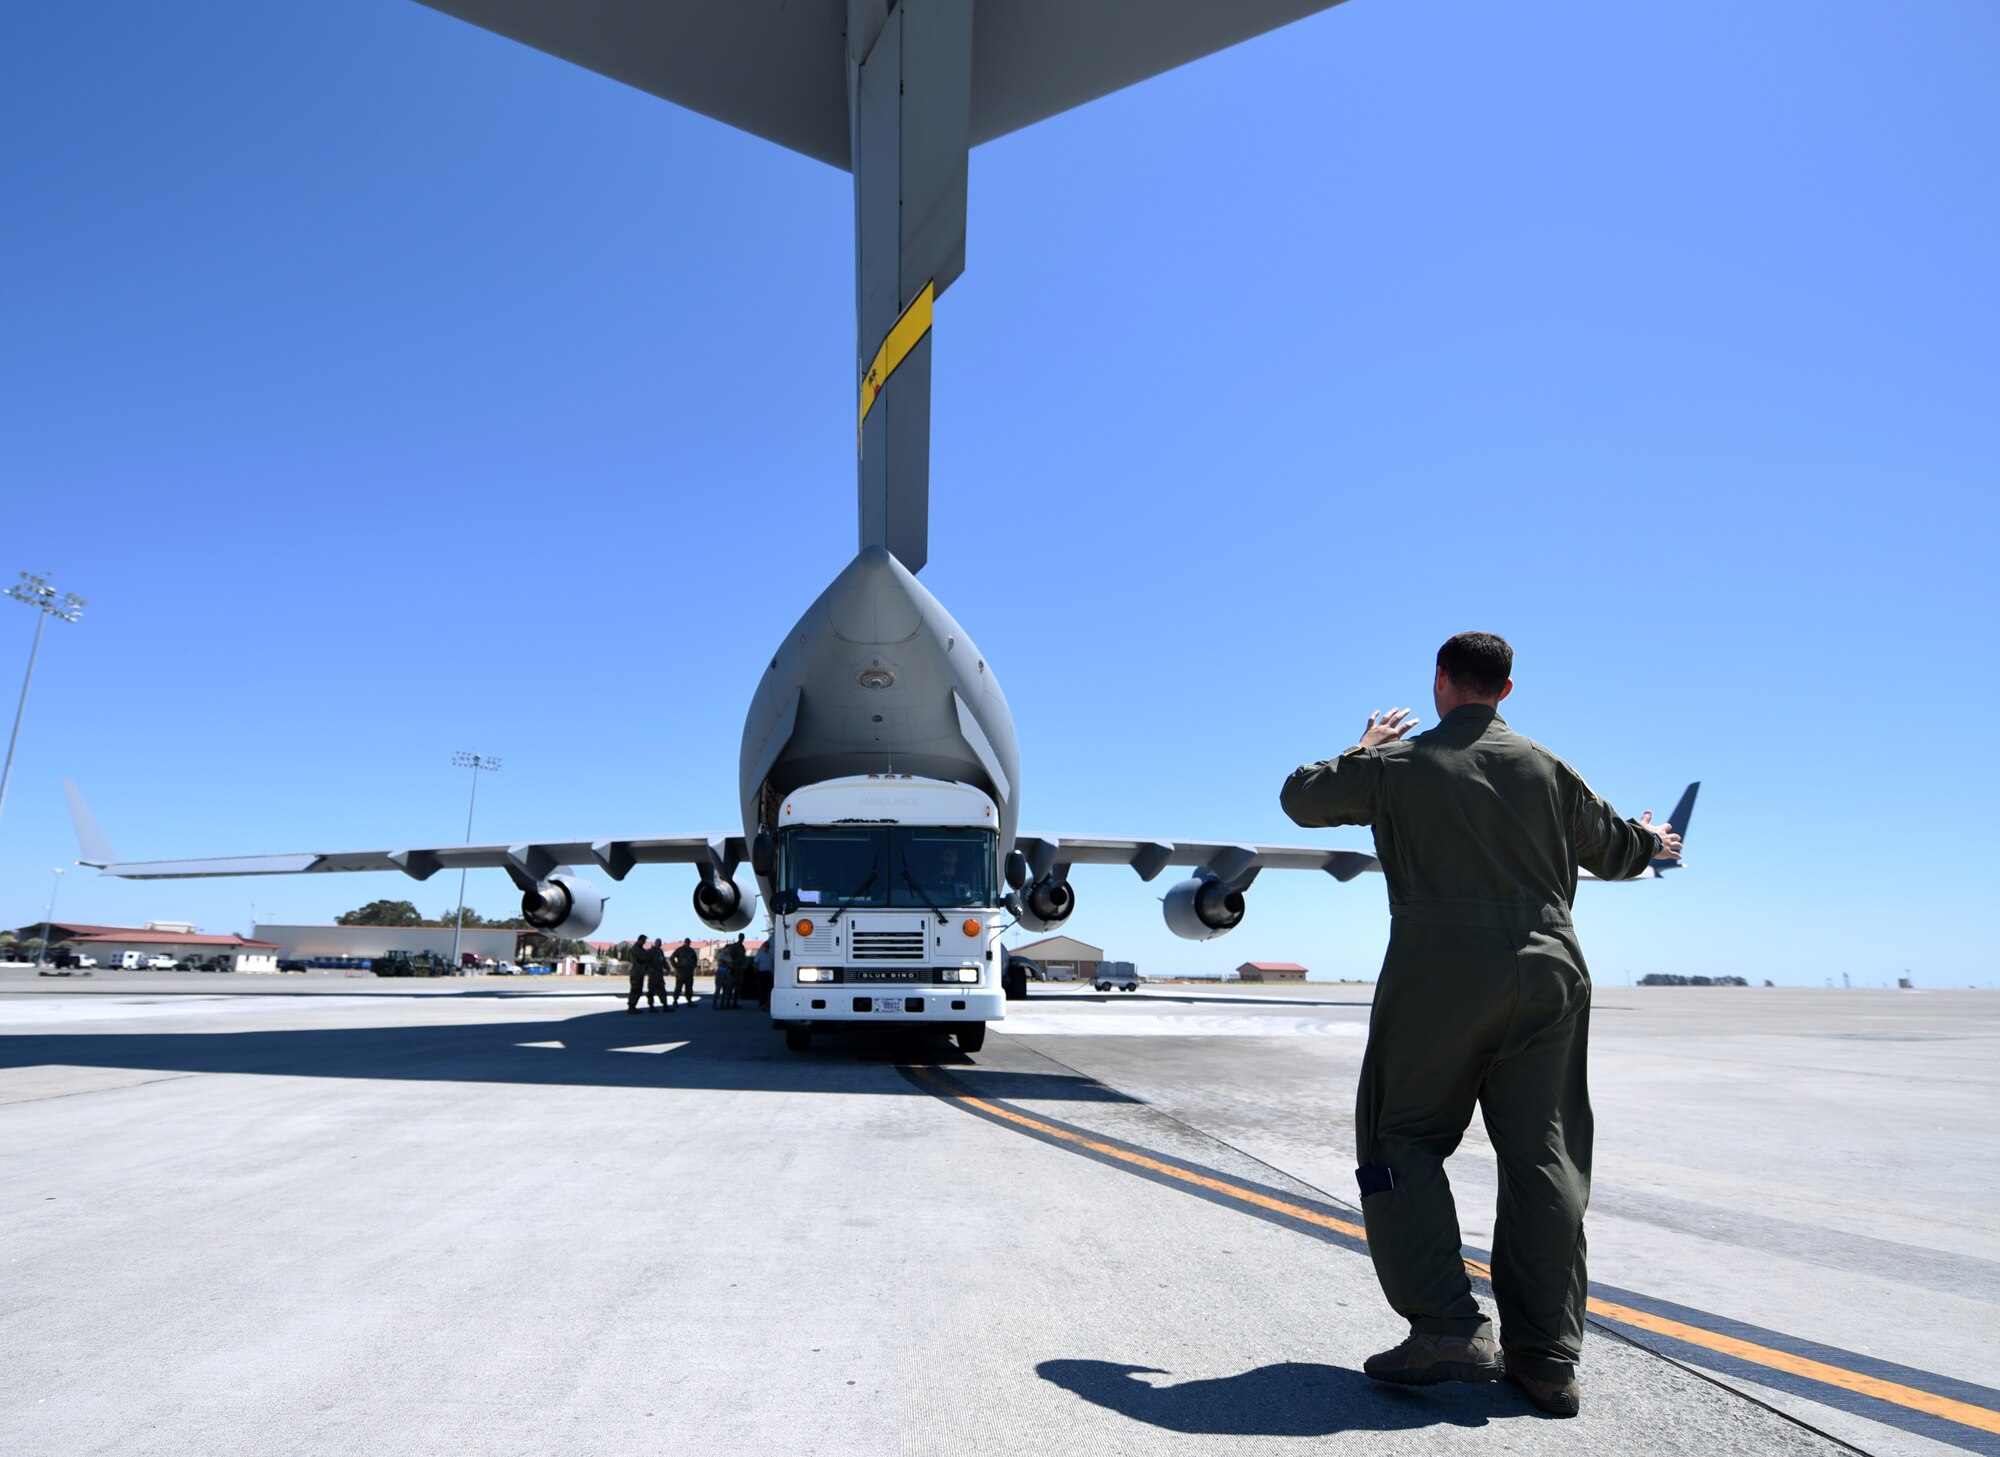 An Airman from March Reserve Base, California, directs the load of a simulated ambulance into a C-17 Globemaster III aircraft Aug. 1, 2019, at Travis Air Force Base, California. The exercise, despite representing a single aspect of the Air Force mobility mission, was an opportunity to encourage joint-force operability between active duty and reserve personnel. (U.S. Air Force photo by Senior Airman Christian Conrad)